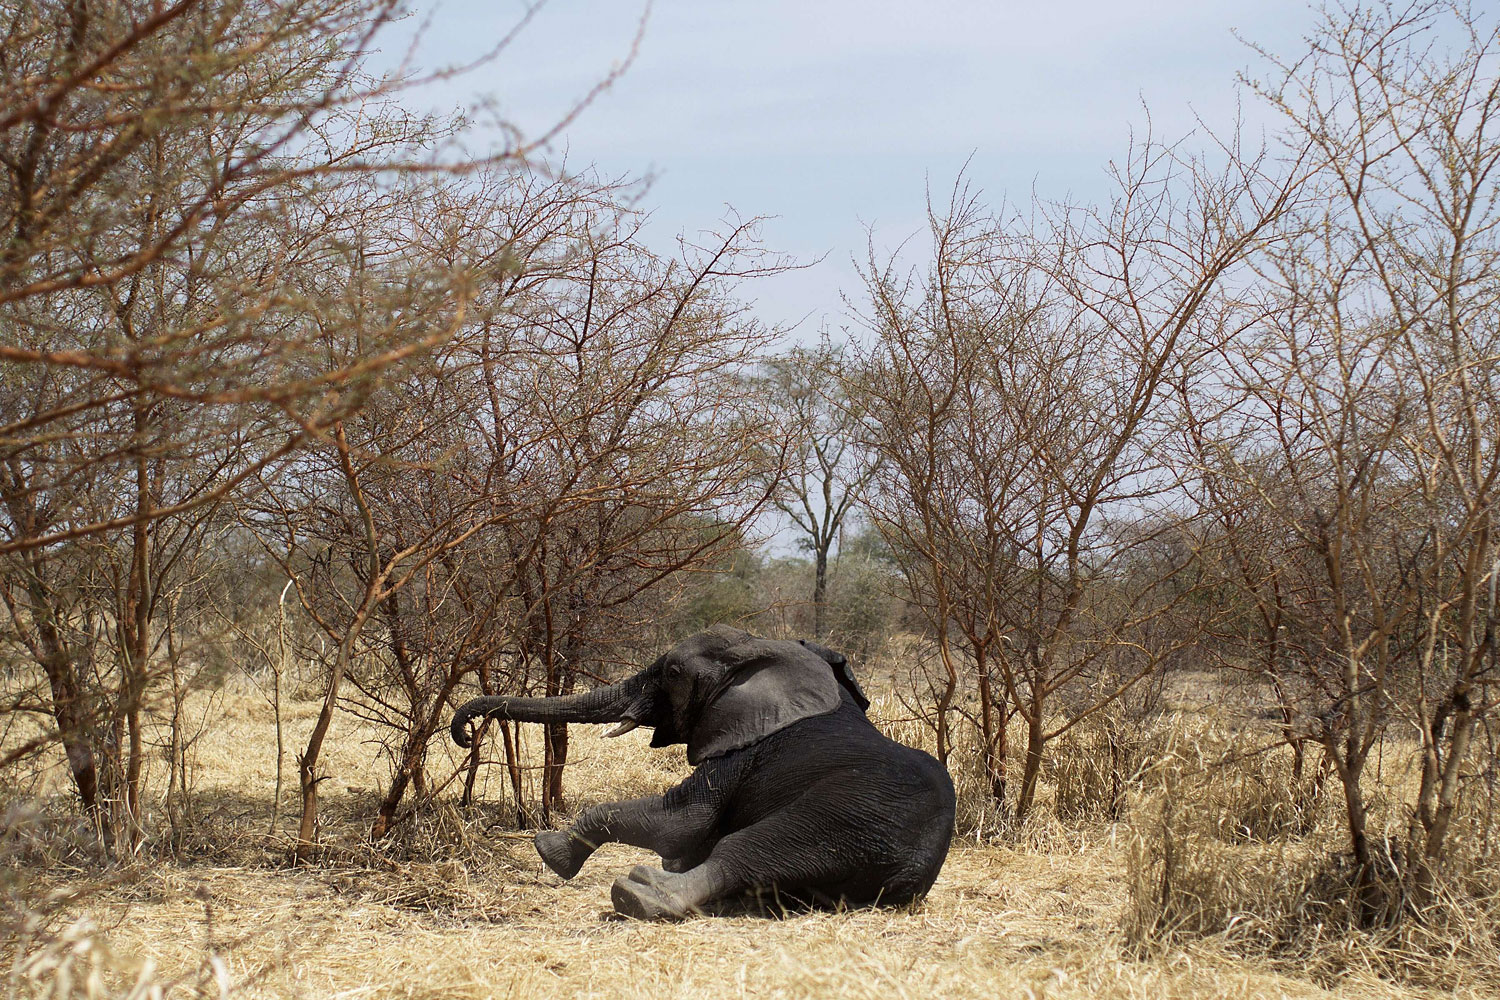 A collared elephant, darted at the Zakouma National Park on Feb. 23, 2014 during a collaring operation aimed at preserving elephants in the park, gets up after the effect of the drug has evaporated. Once sedated the elephant is fitted with a radio collar that will in the future relay its position, increasing the chances to protect him against poachers.